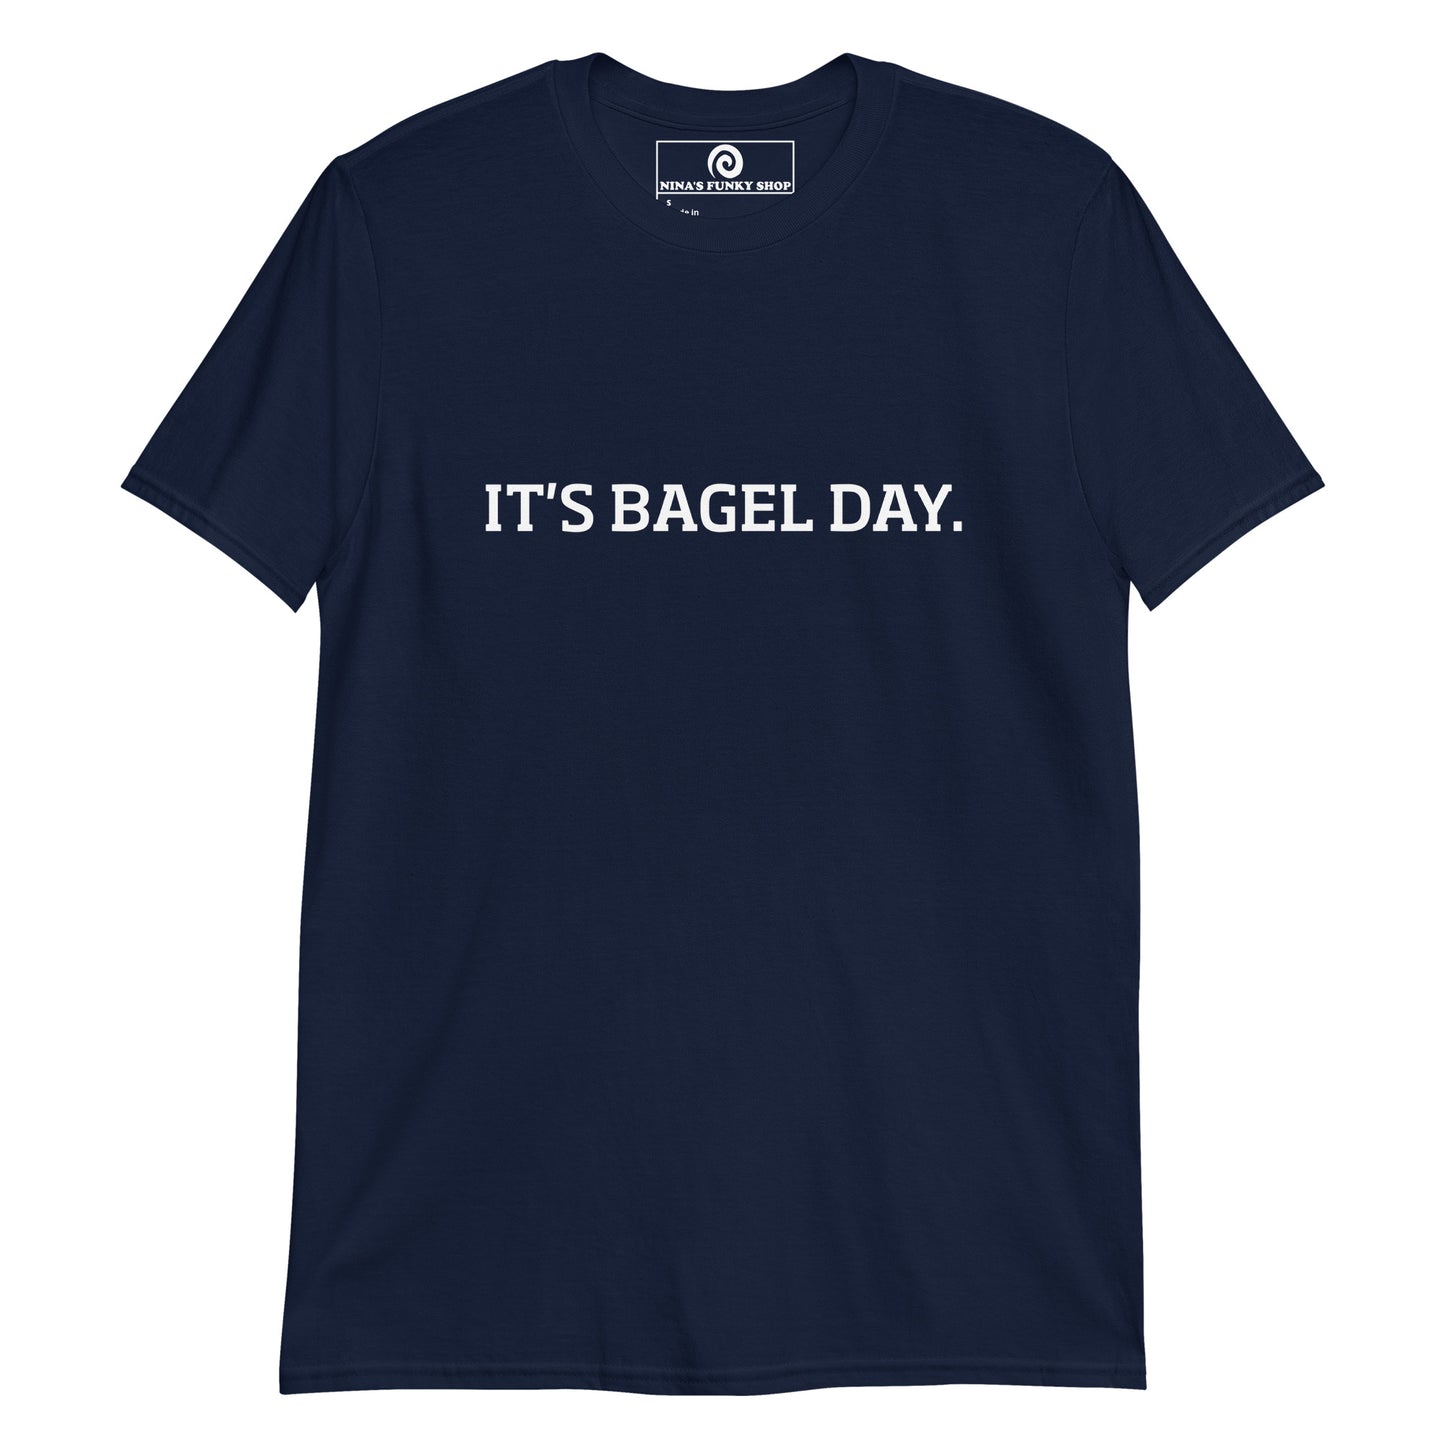 Navy Bagel Day T-shirt - Everyday is bagel day! Love bagels? Looking for a funny gift for a bagel enthusiast? This bagel day t-shirt is just what you need. It's soft and comfortable with a simple bagel saying design, expertly printed on the front. The perfect funny foodie shirt for bagel lovers. Designed by Nina and made just for you.